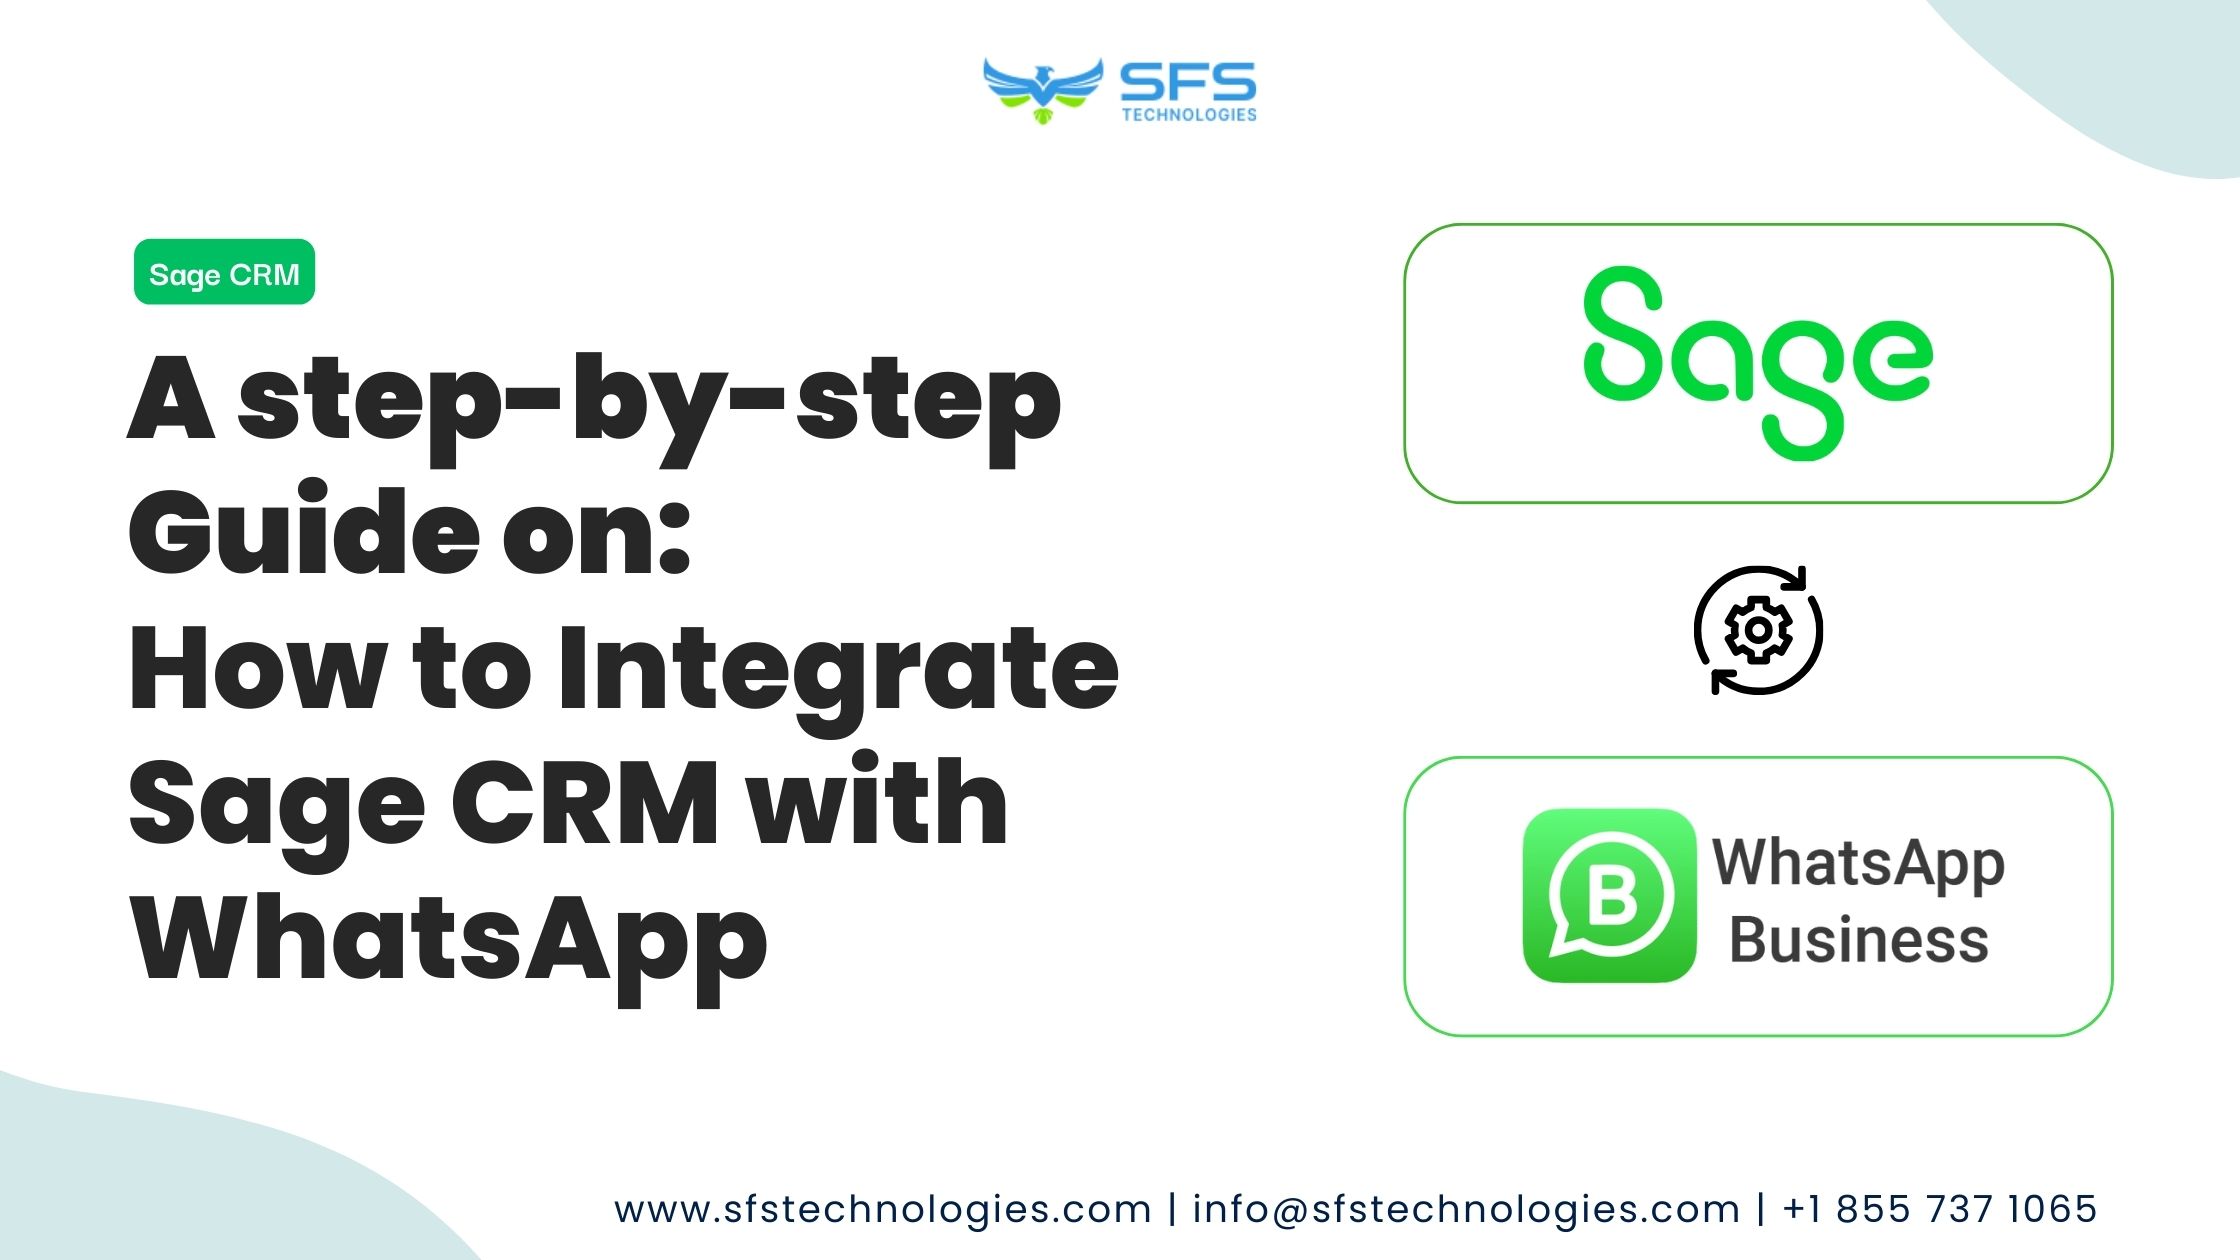 How to Integrate Sage CRM with WhatsApp